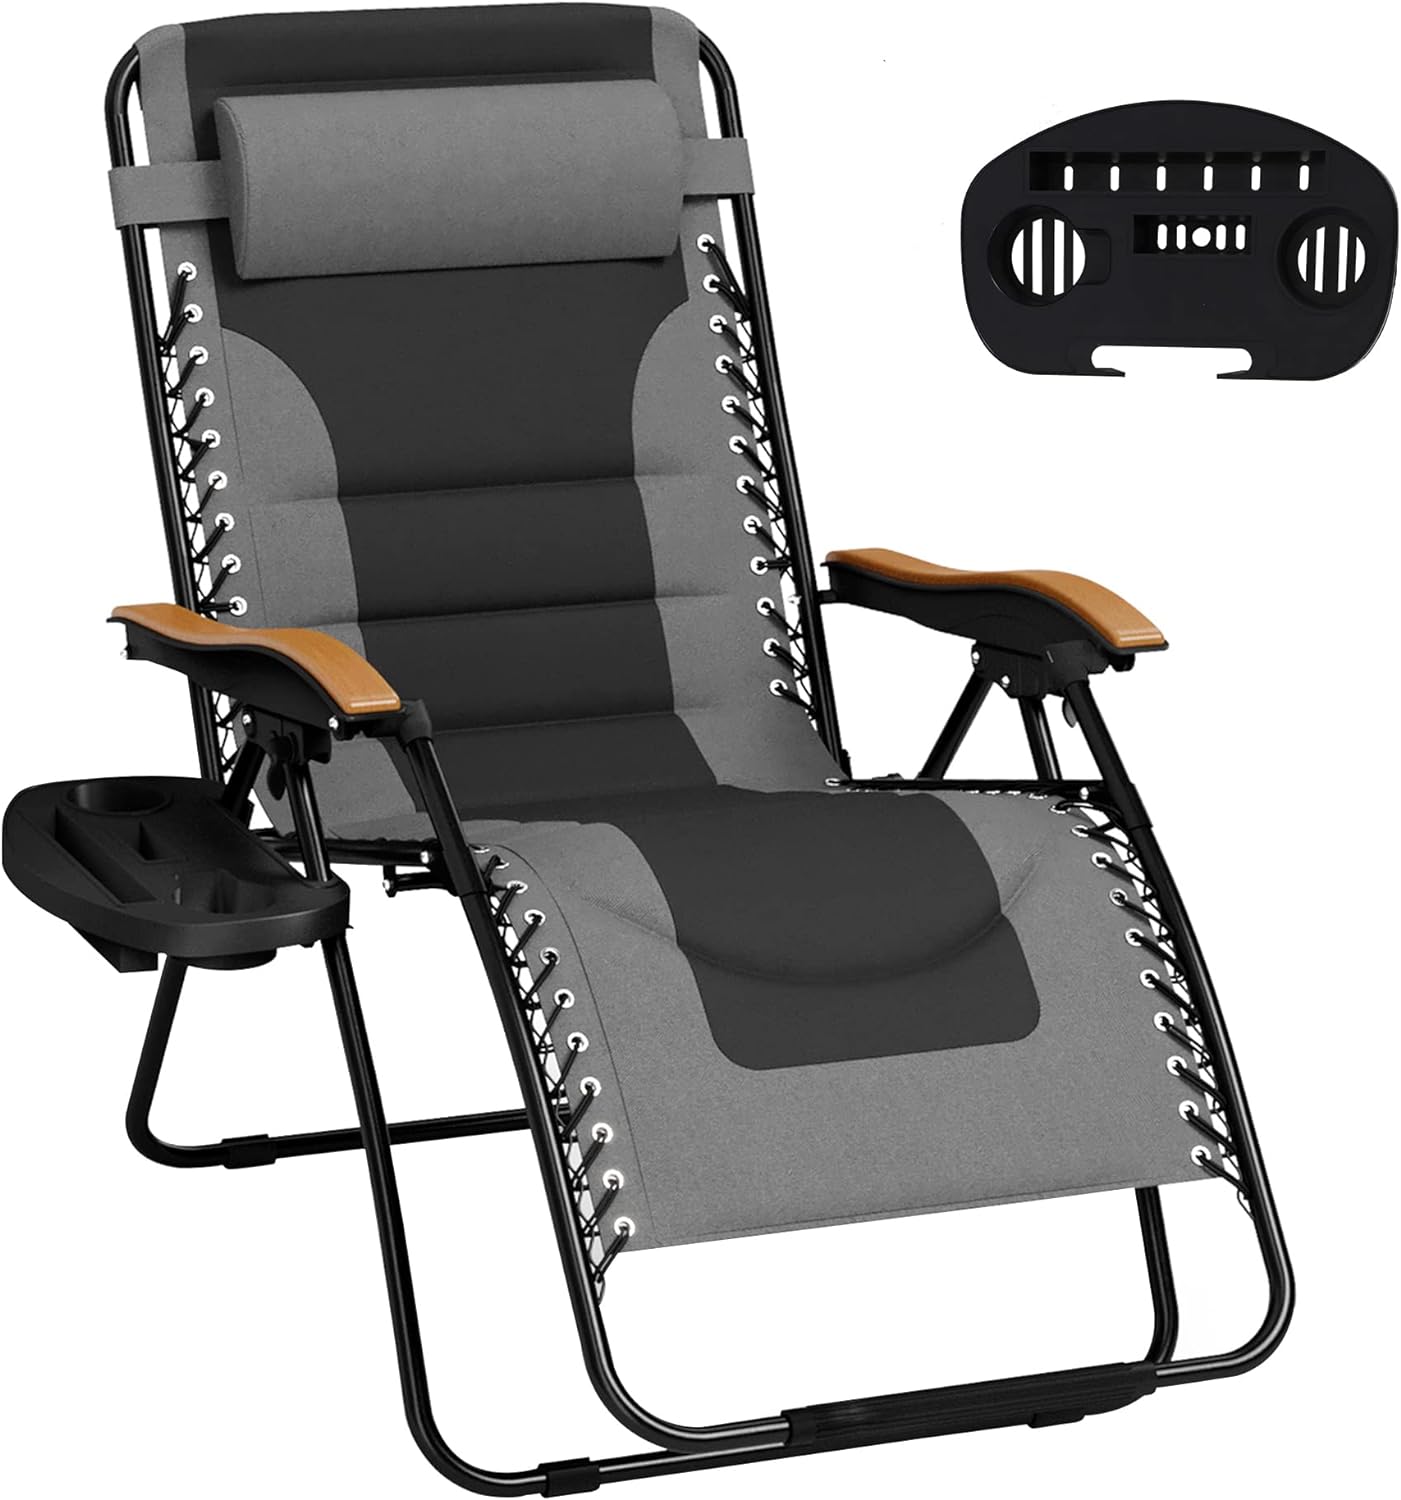 MFSTUDIO Zero Gravity Chairs, Oversized Patio Recliner Chair, Padded Folding Lawn Chair with Cup Holder Tray, Support 400lbs, Grey